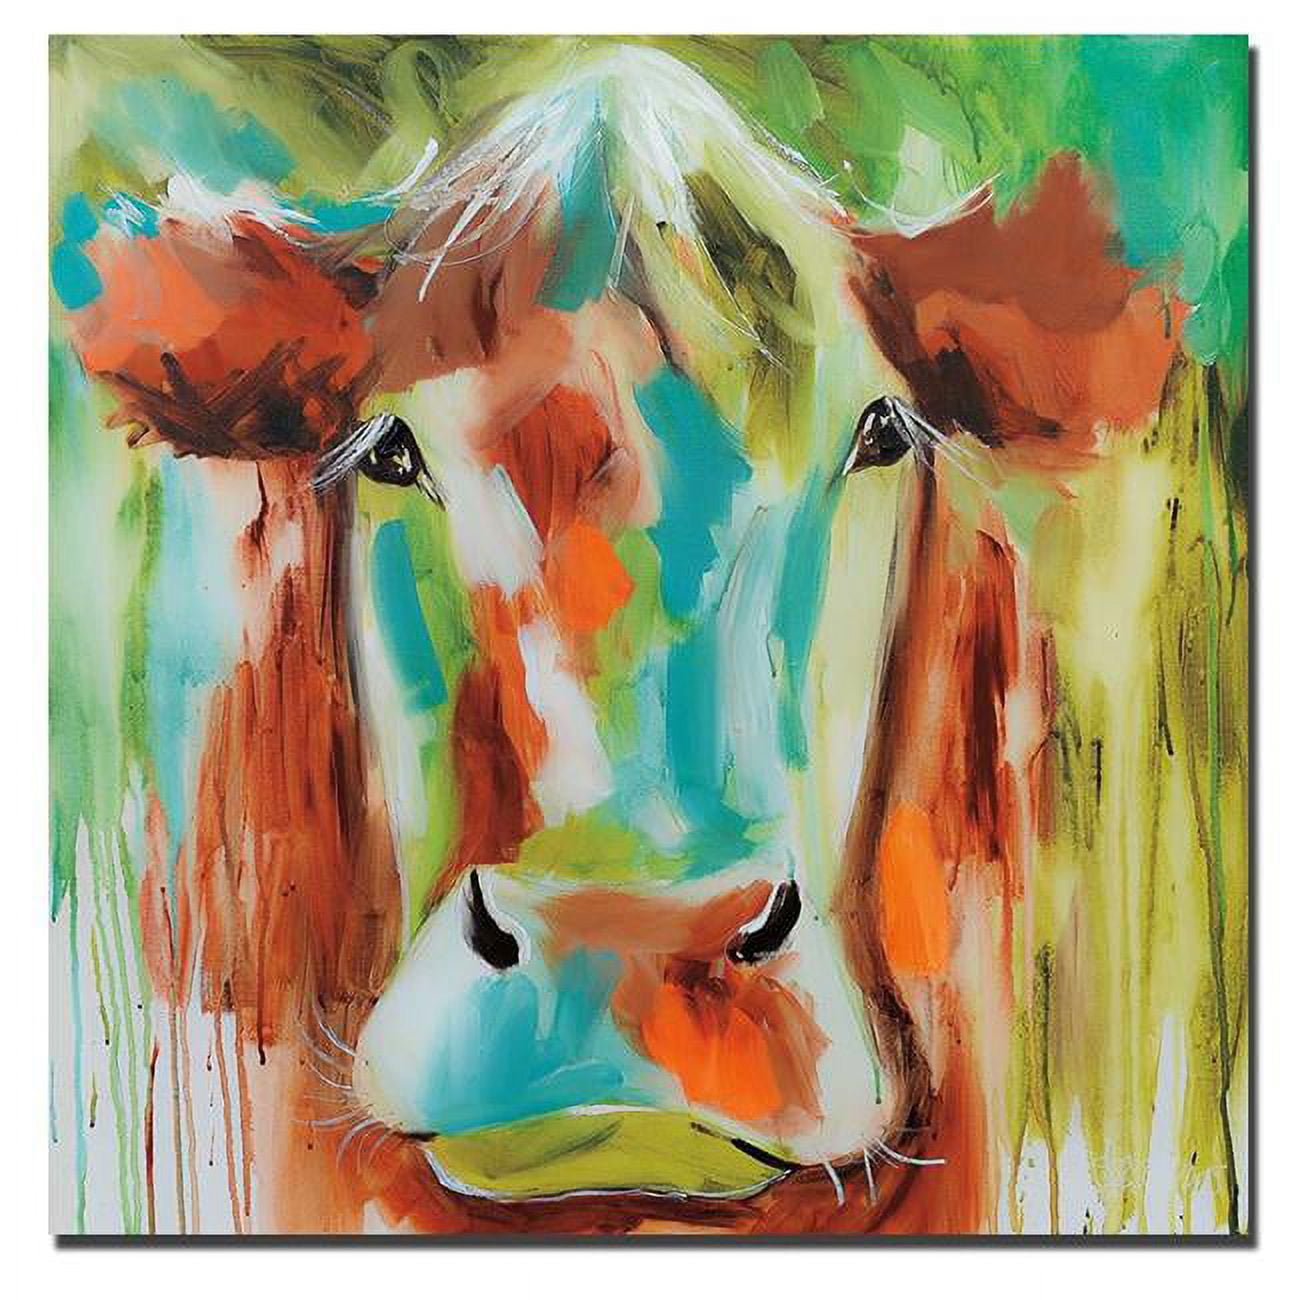 1212q277cg Misty Pasture By Amanda Brooks Premium Gallery-wrapped Canvas Giclee Art - 12 X 12 X 1.5 In.